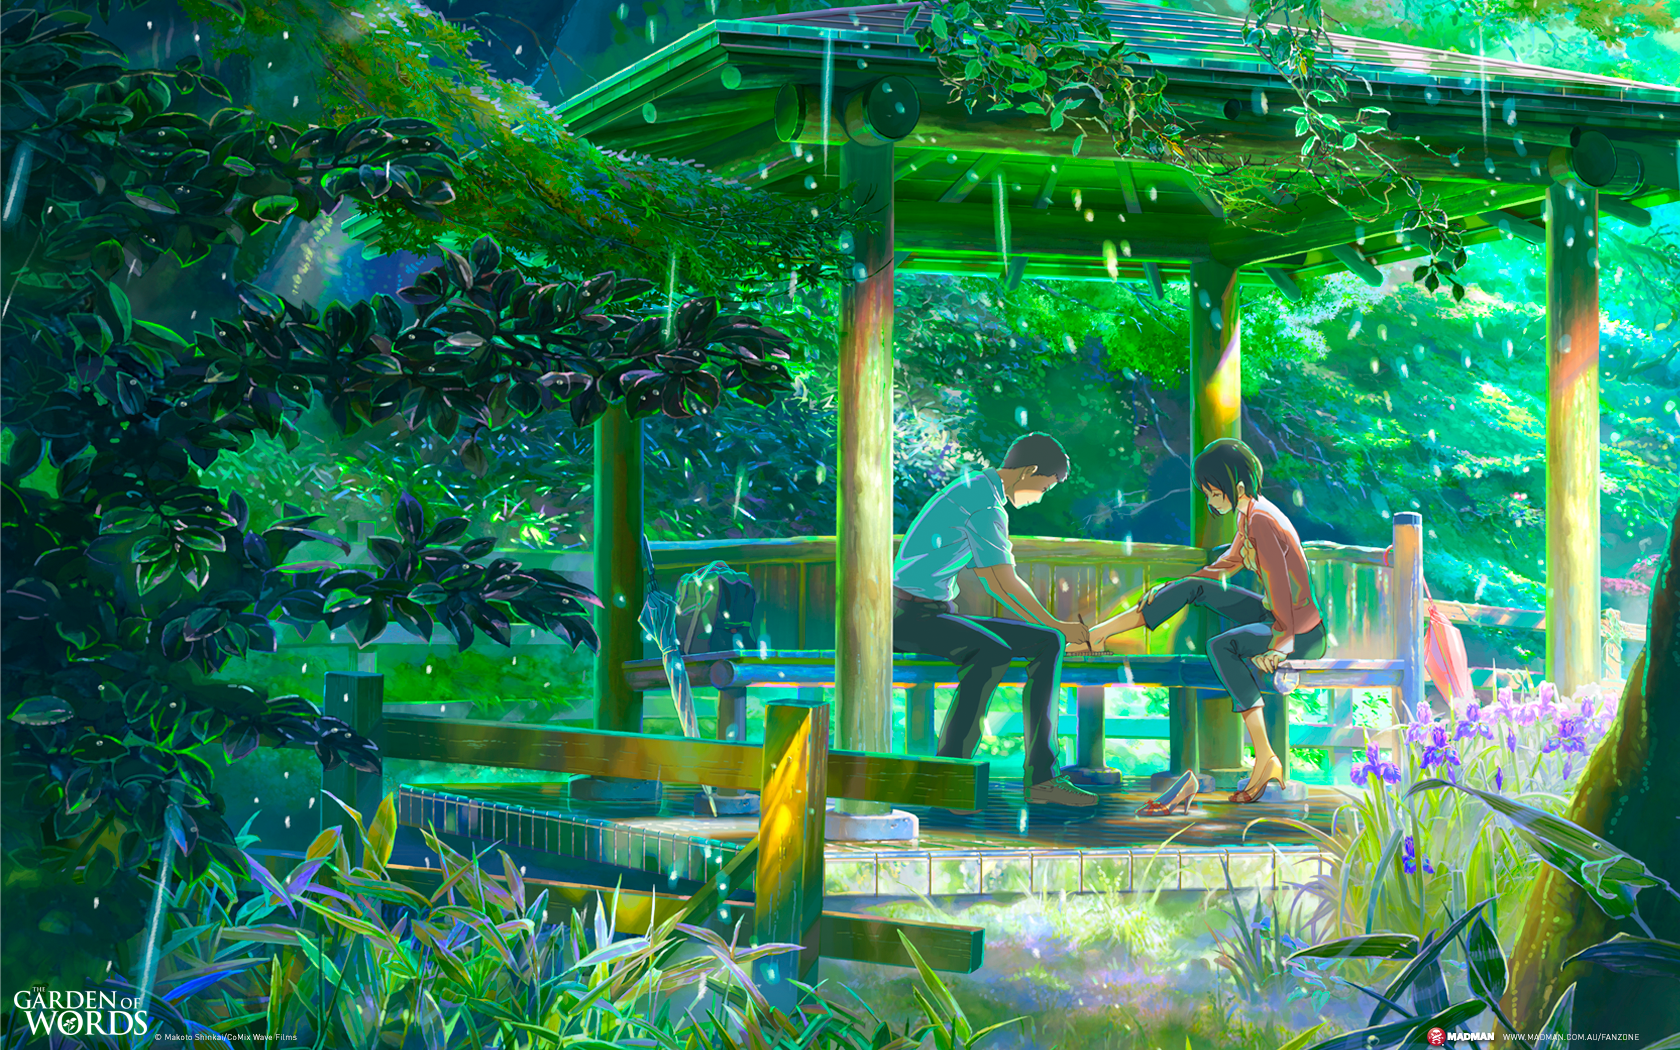 Here are 100x 15360 x 8640 anime wallpapers taken directly from the HDR  blu-ray of the movies Your Name and The Garden of Words. I have  filtered, color corrected, and upscaled them